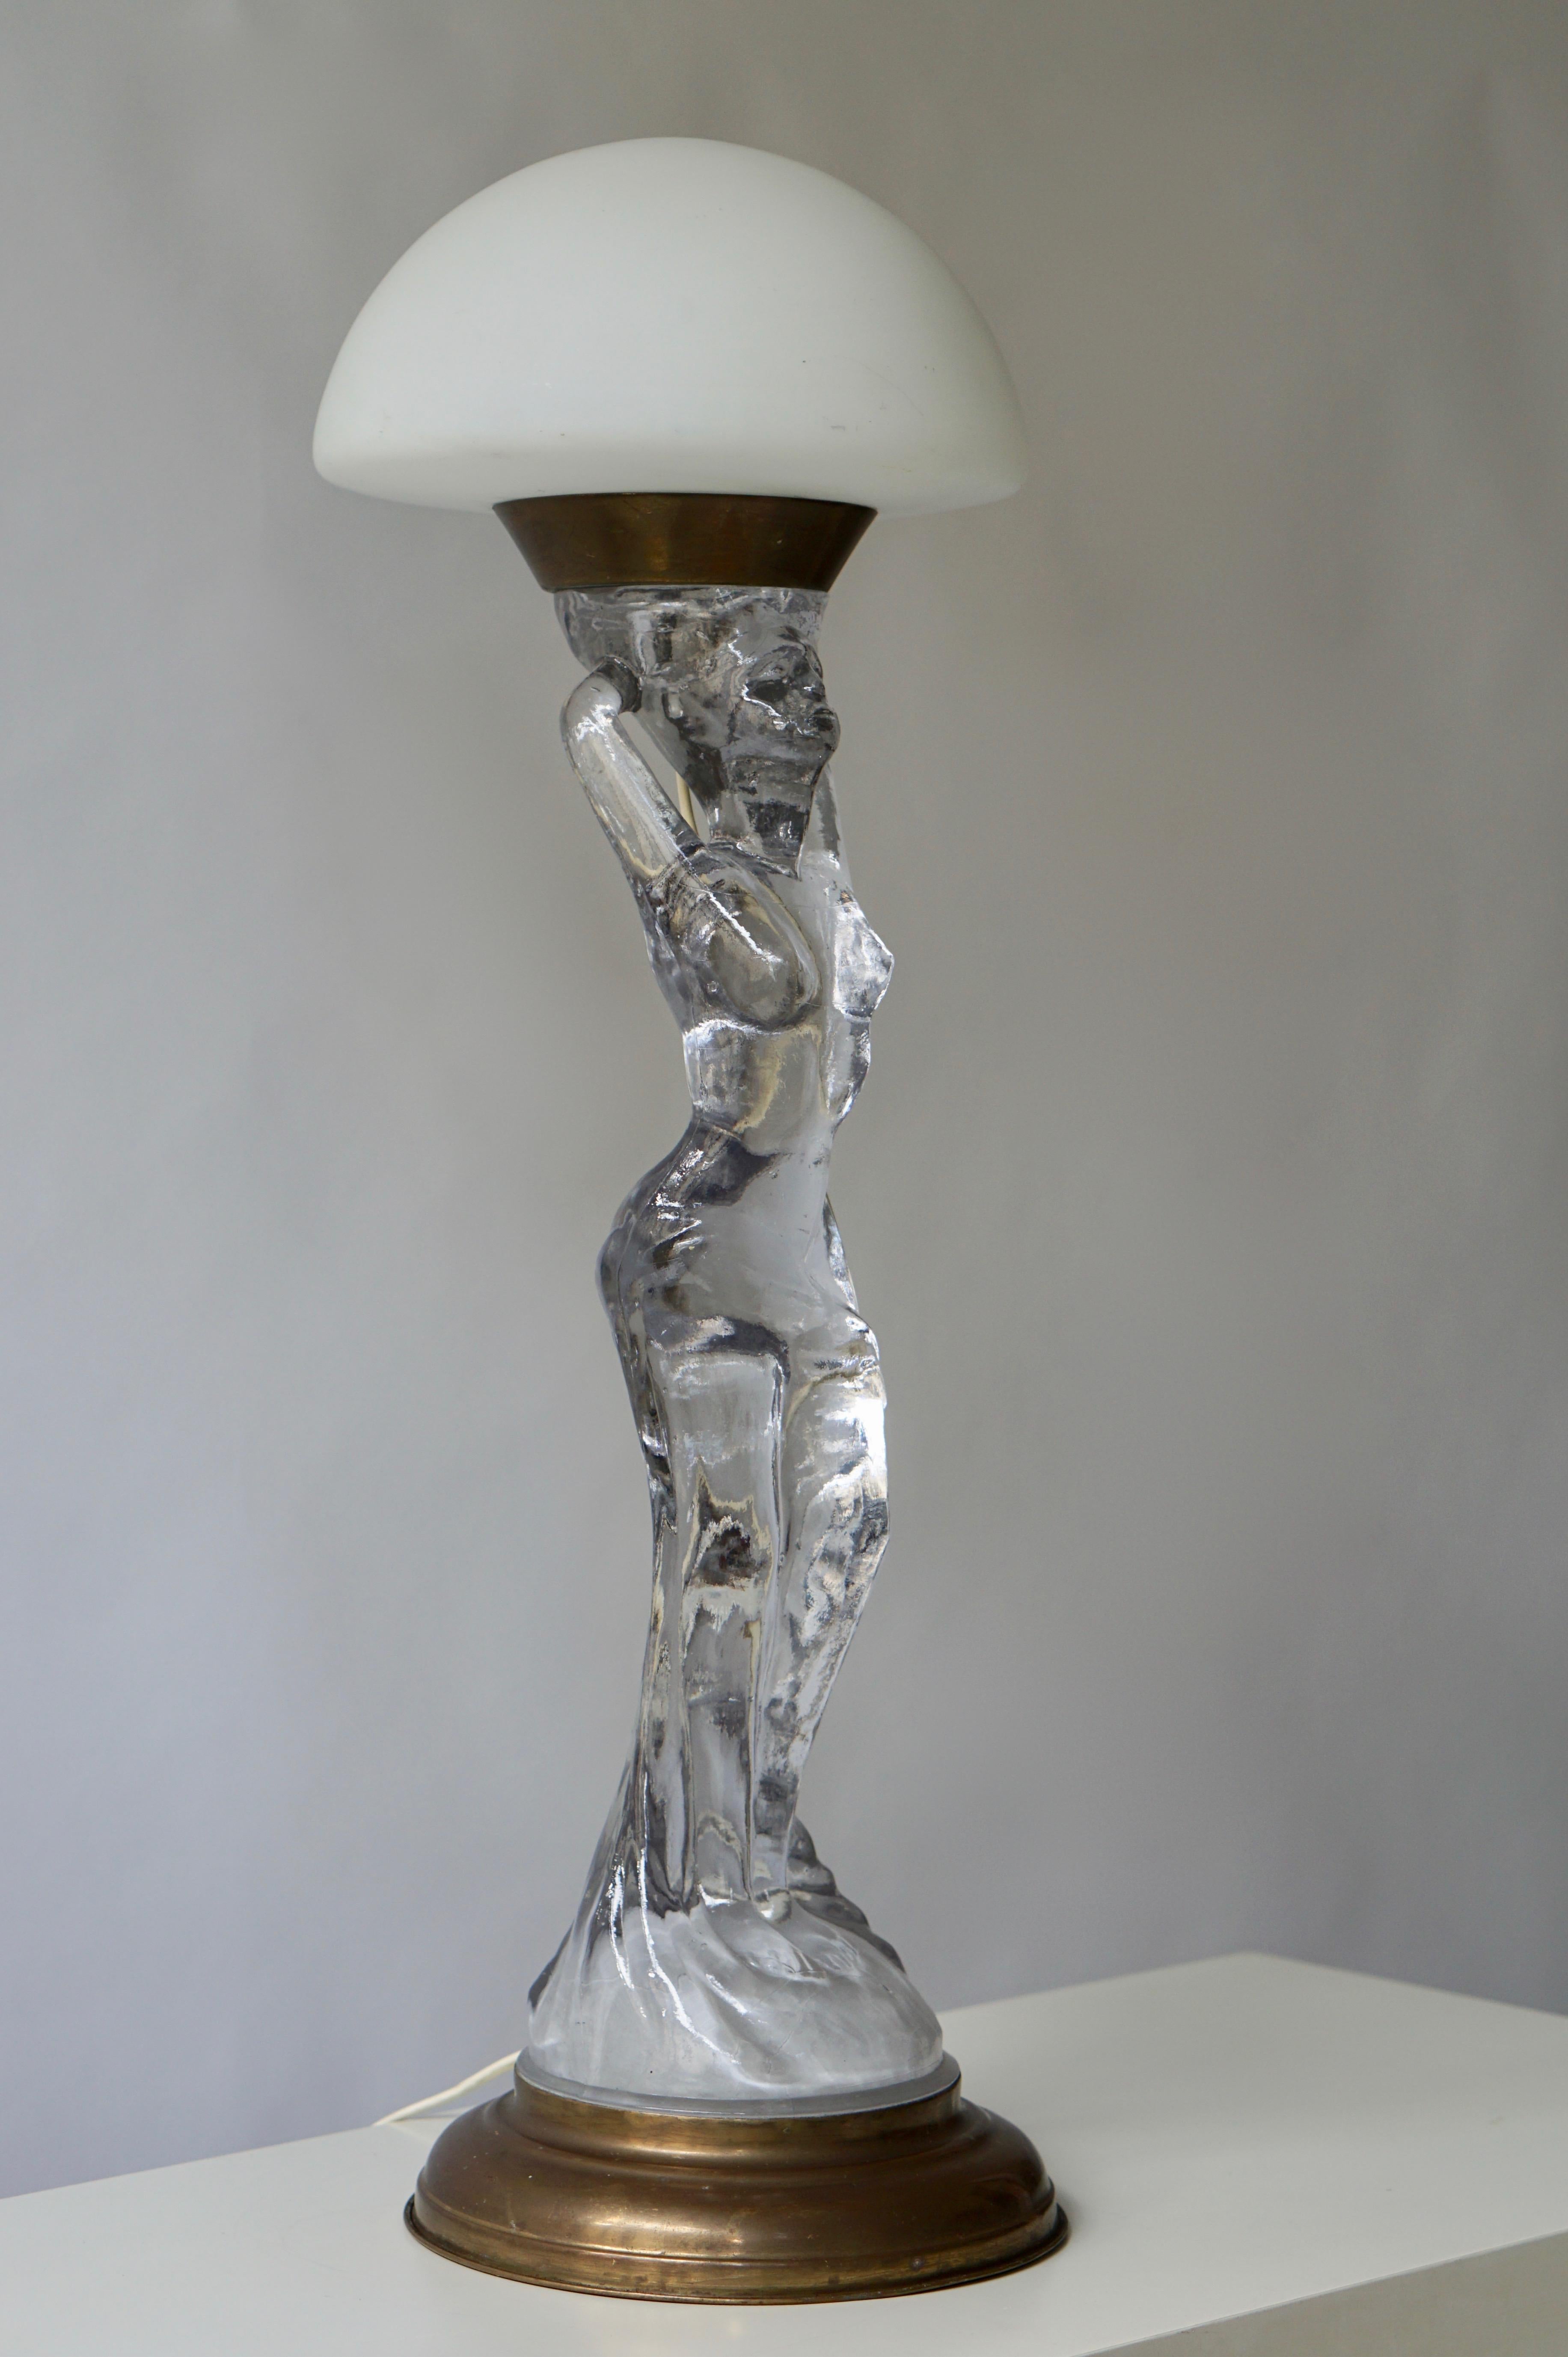 Wonderful nude table lamp in glass and brass.
Height 72 cm.
Diameter 24 cm.